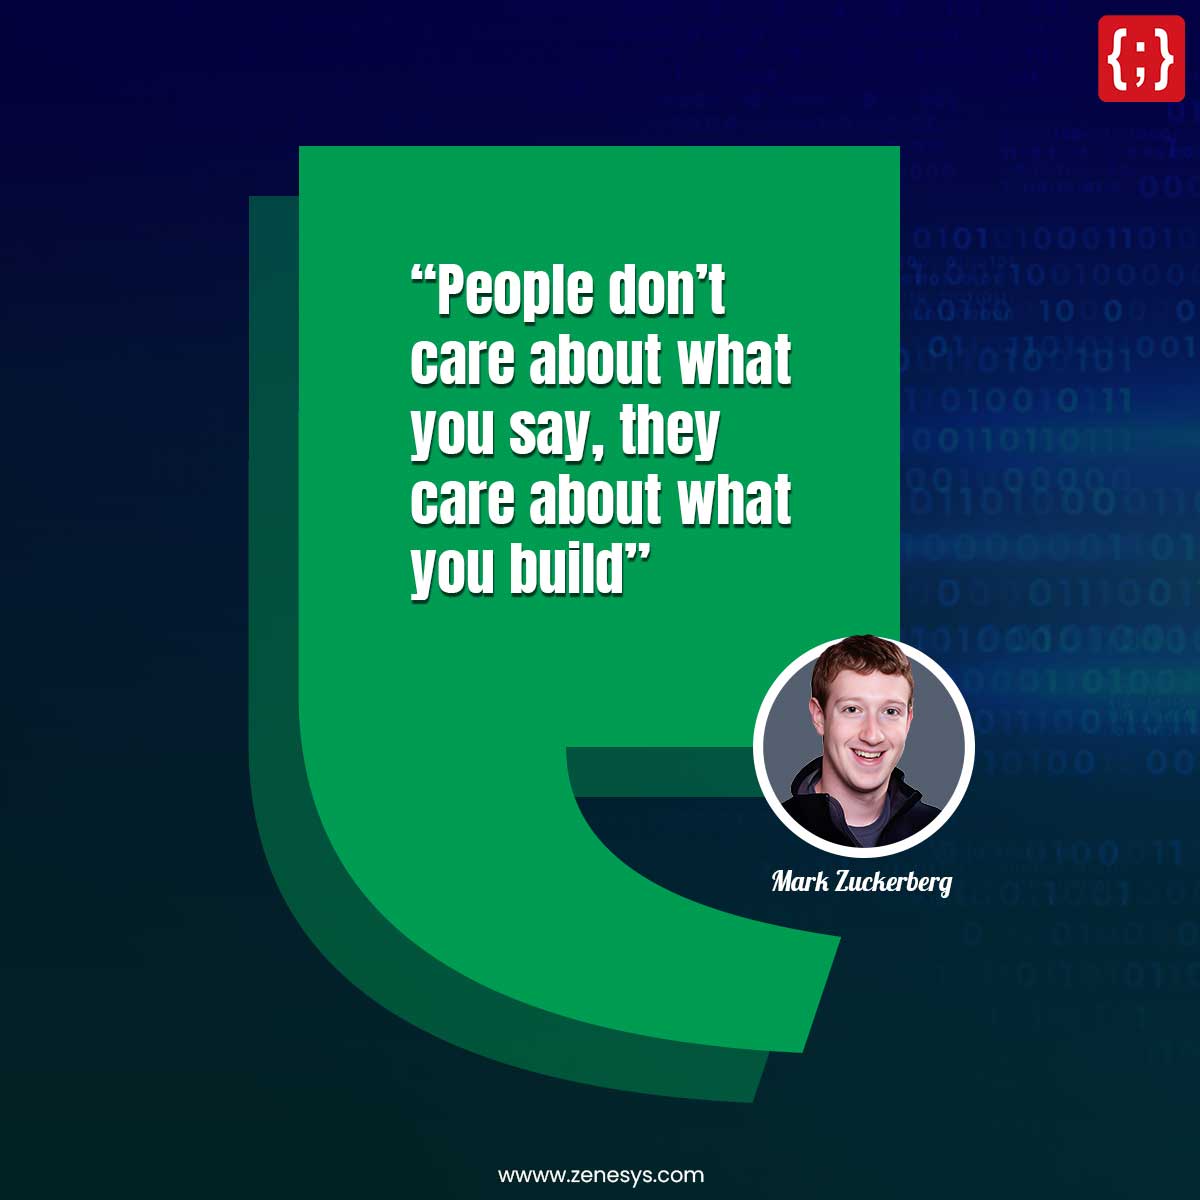 Mark Zuckerberg hits the nail on the head. Actions speak louder than words. This Monday let's focus on making progress. What are you building this week? #MondayMotivation #LetsGo #Developers #coding #Zenesys